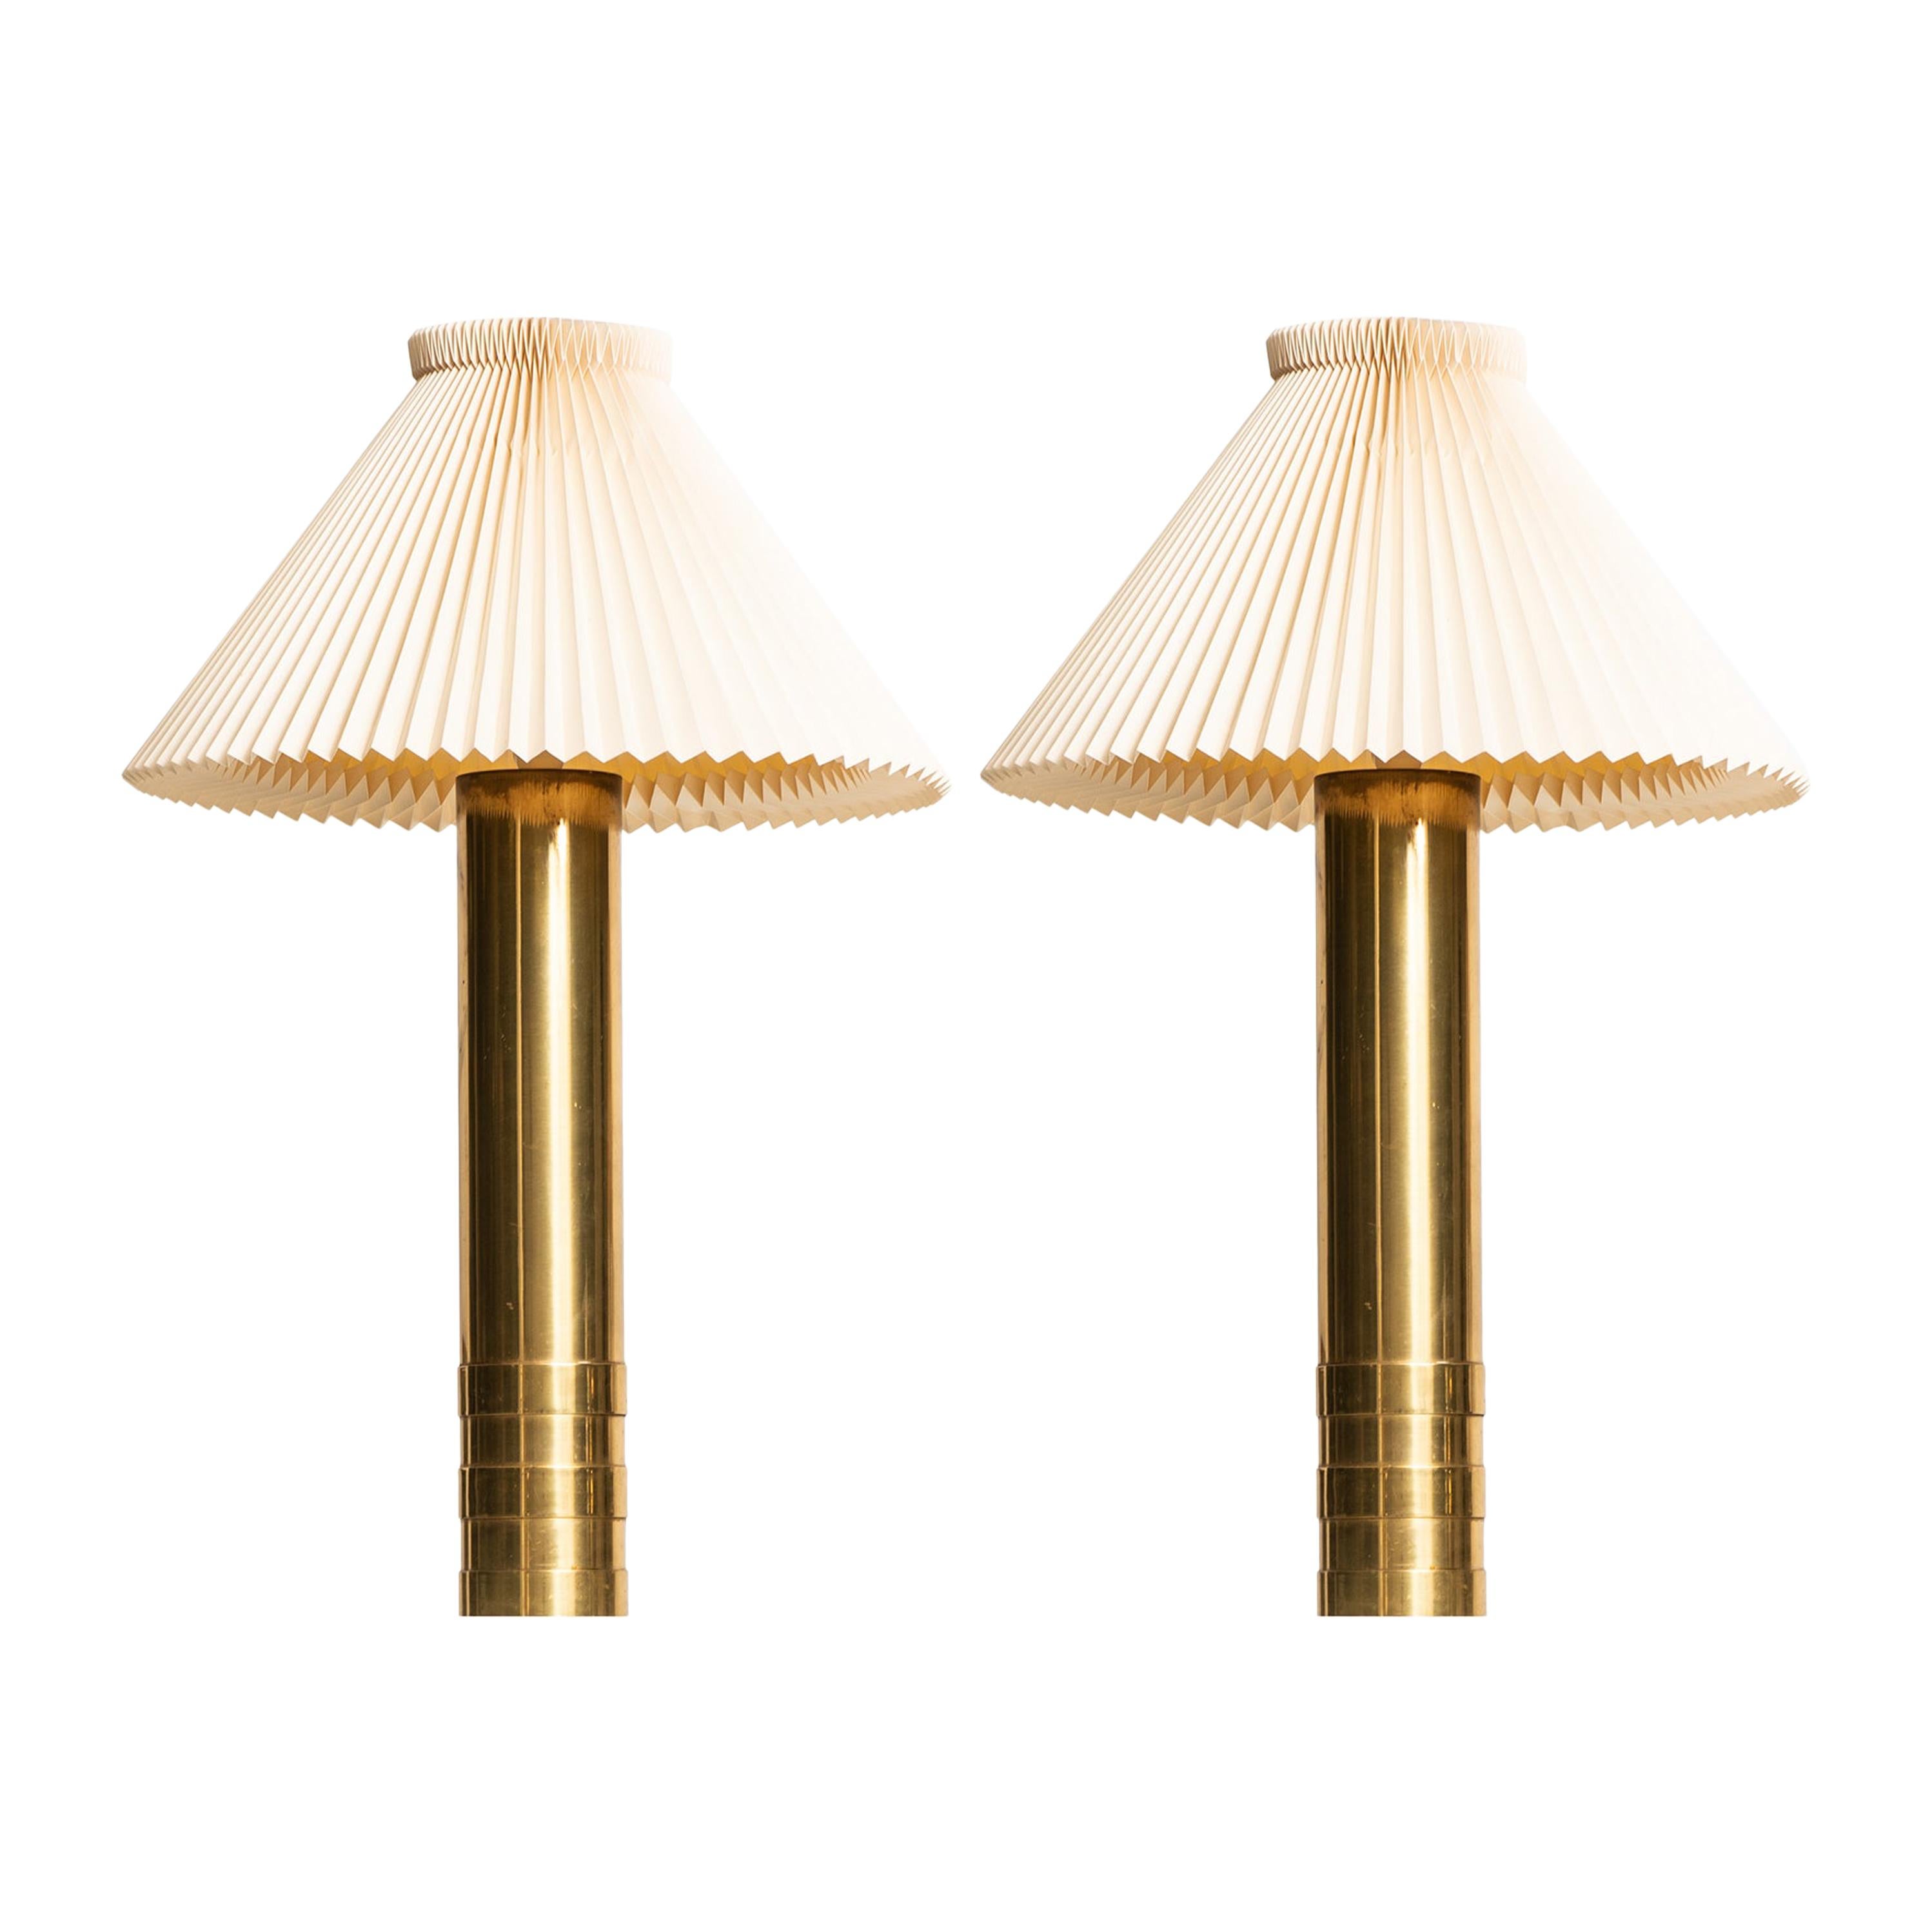 Pair of Very Tall Table Lamps Produced in Sweden